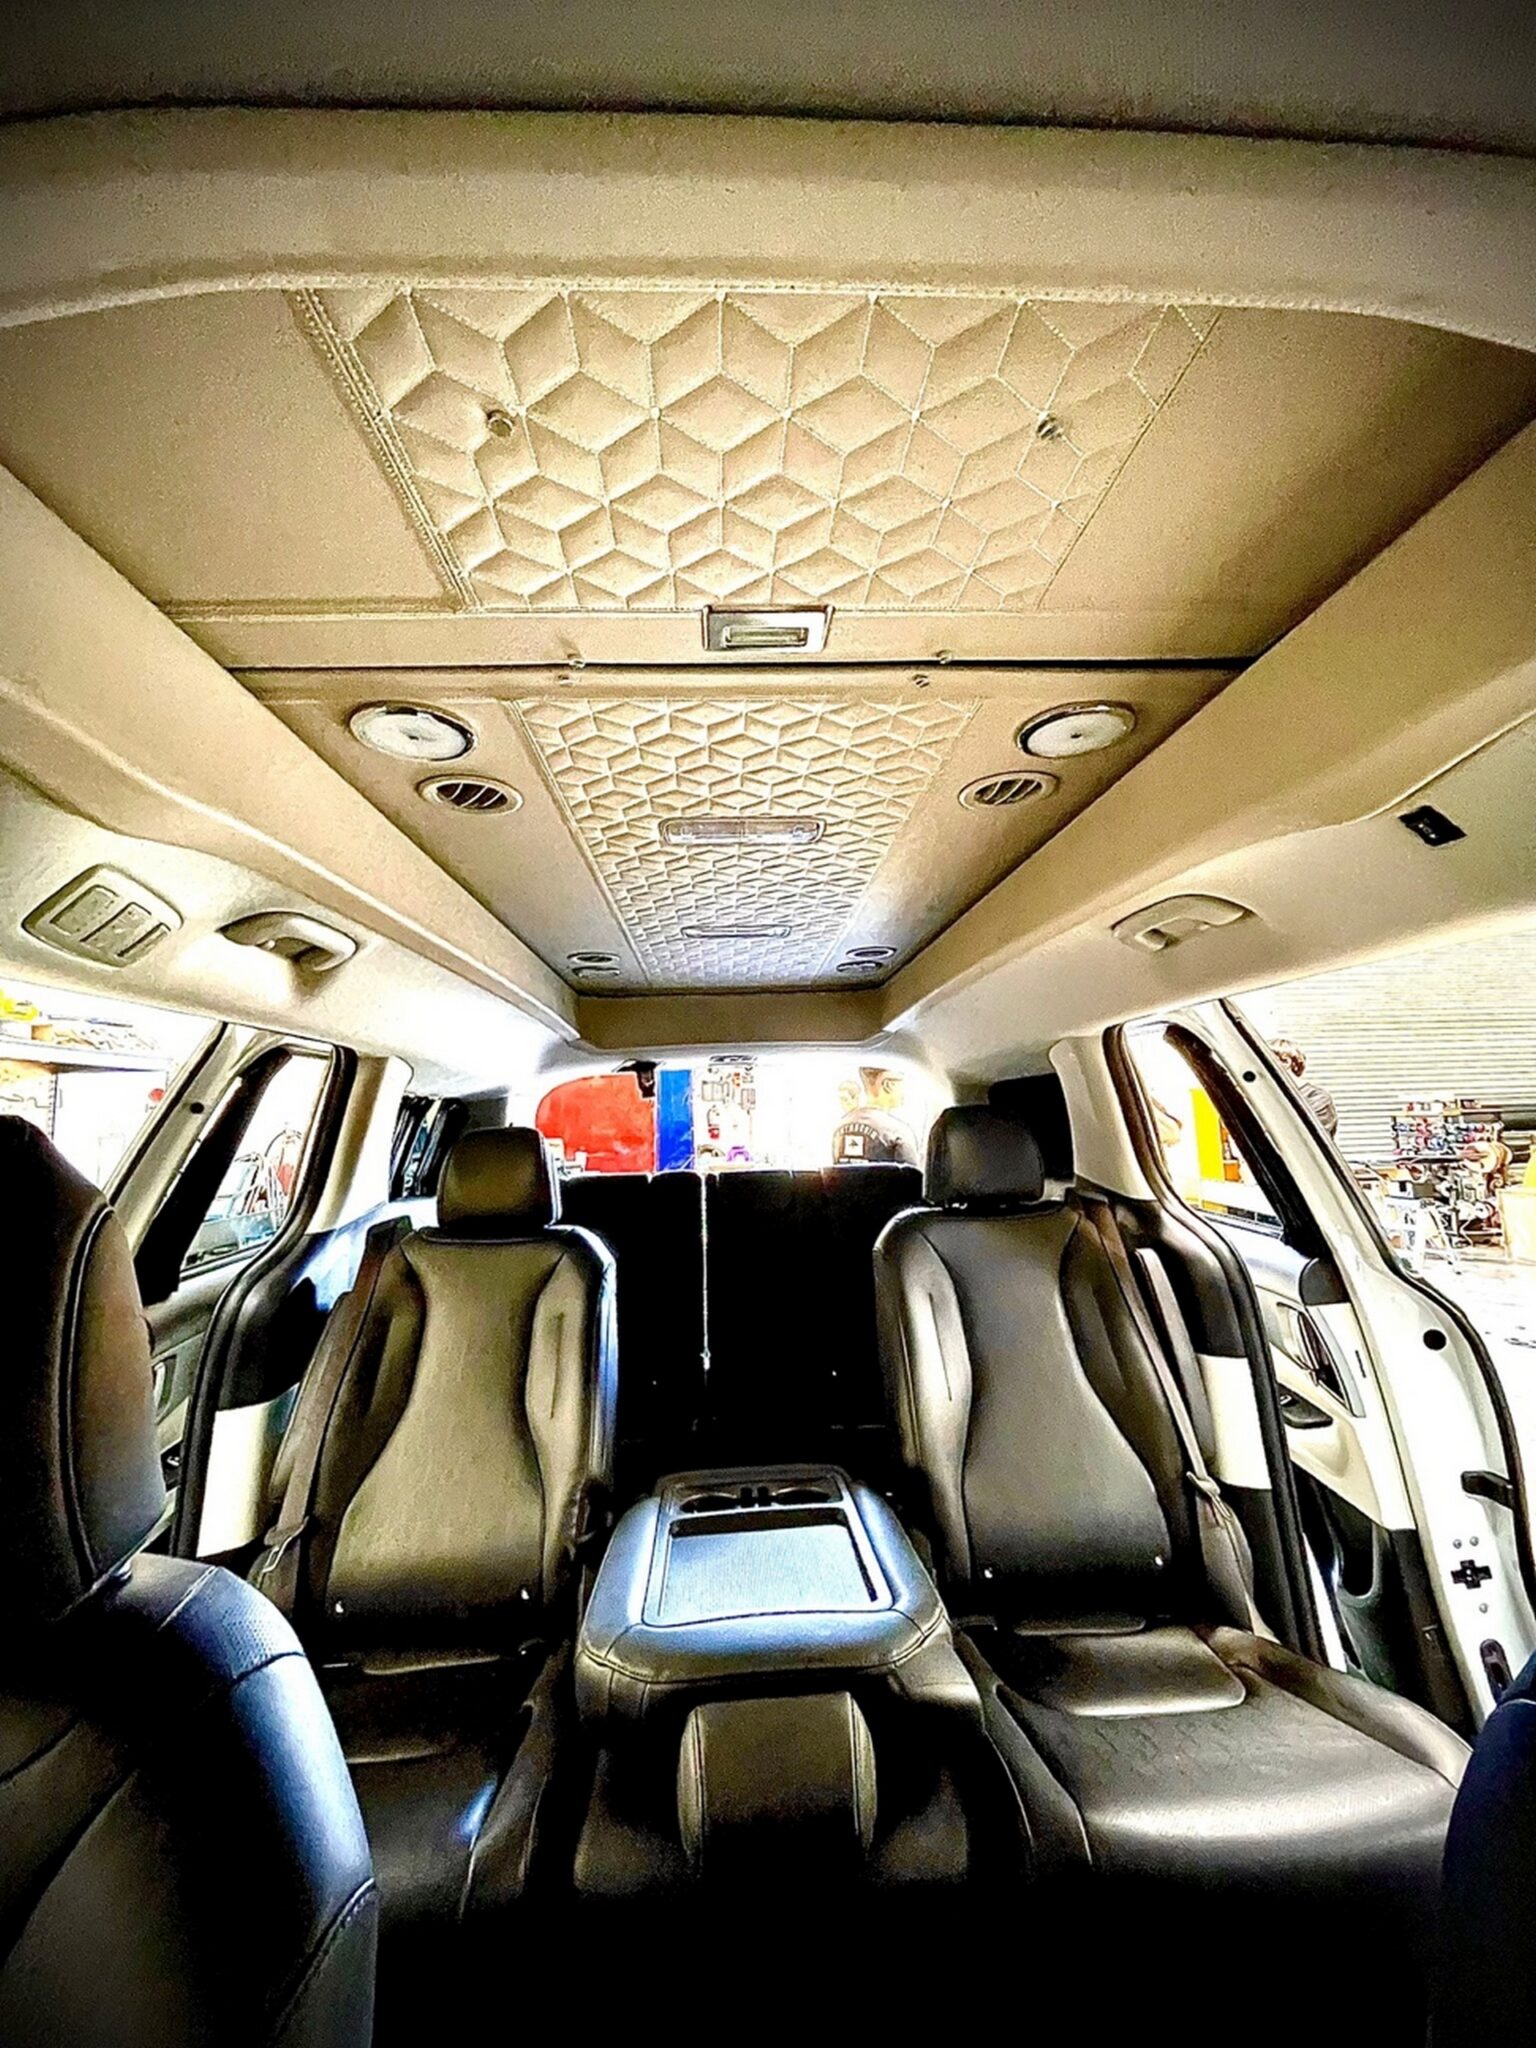 Turn Your Kia Carnival Into A Luxury Camper With UniCamp’s 16,000 Pop